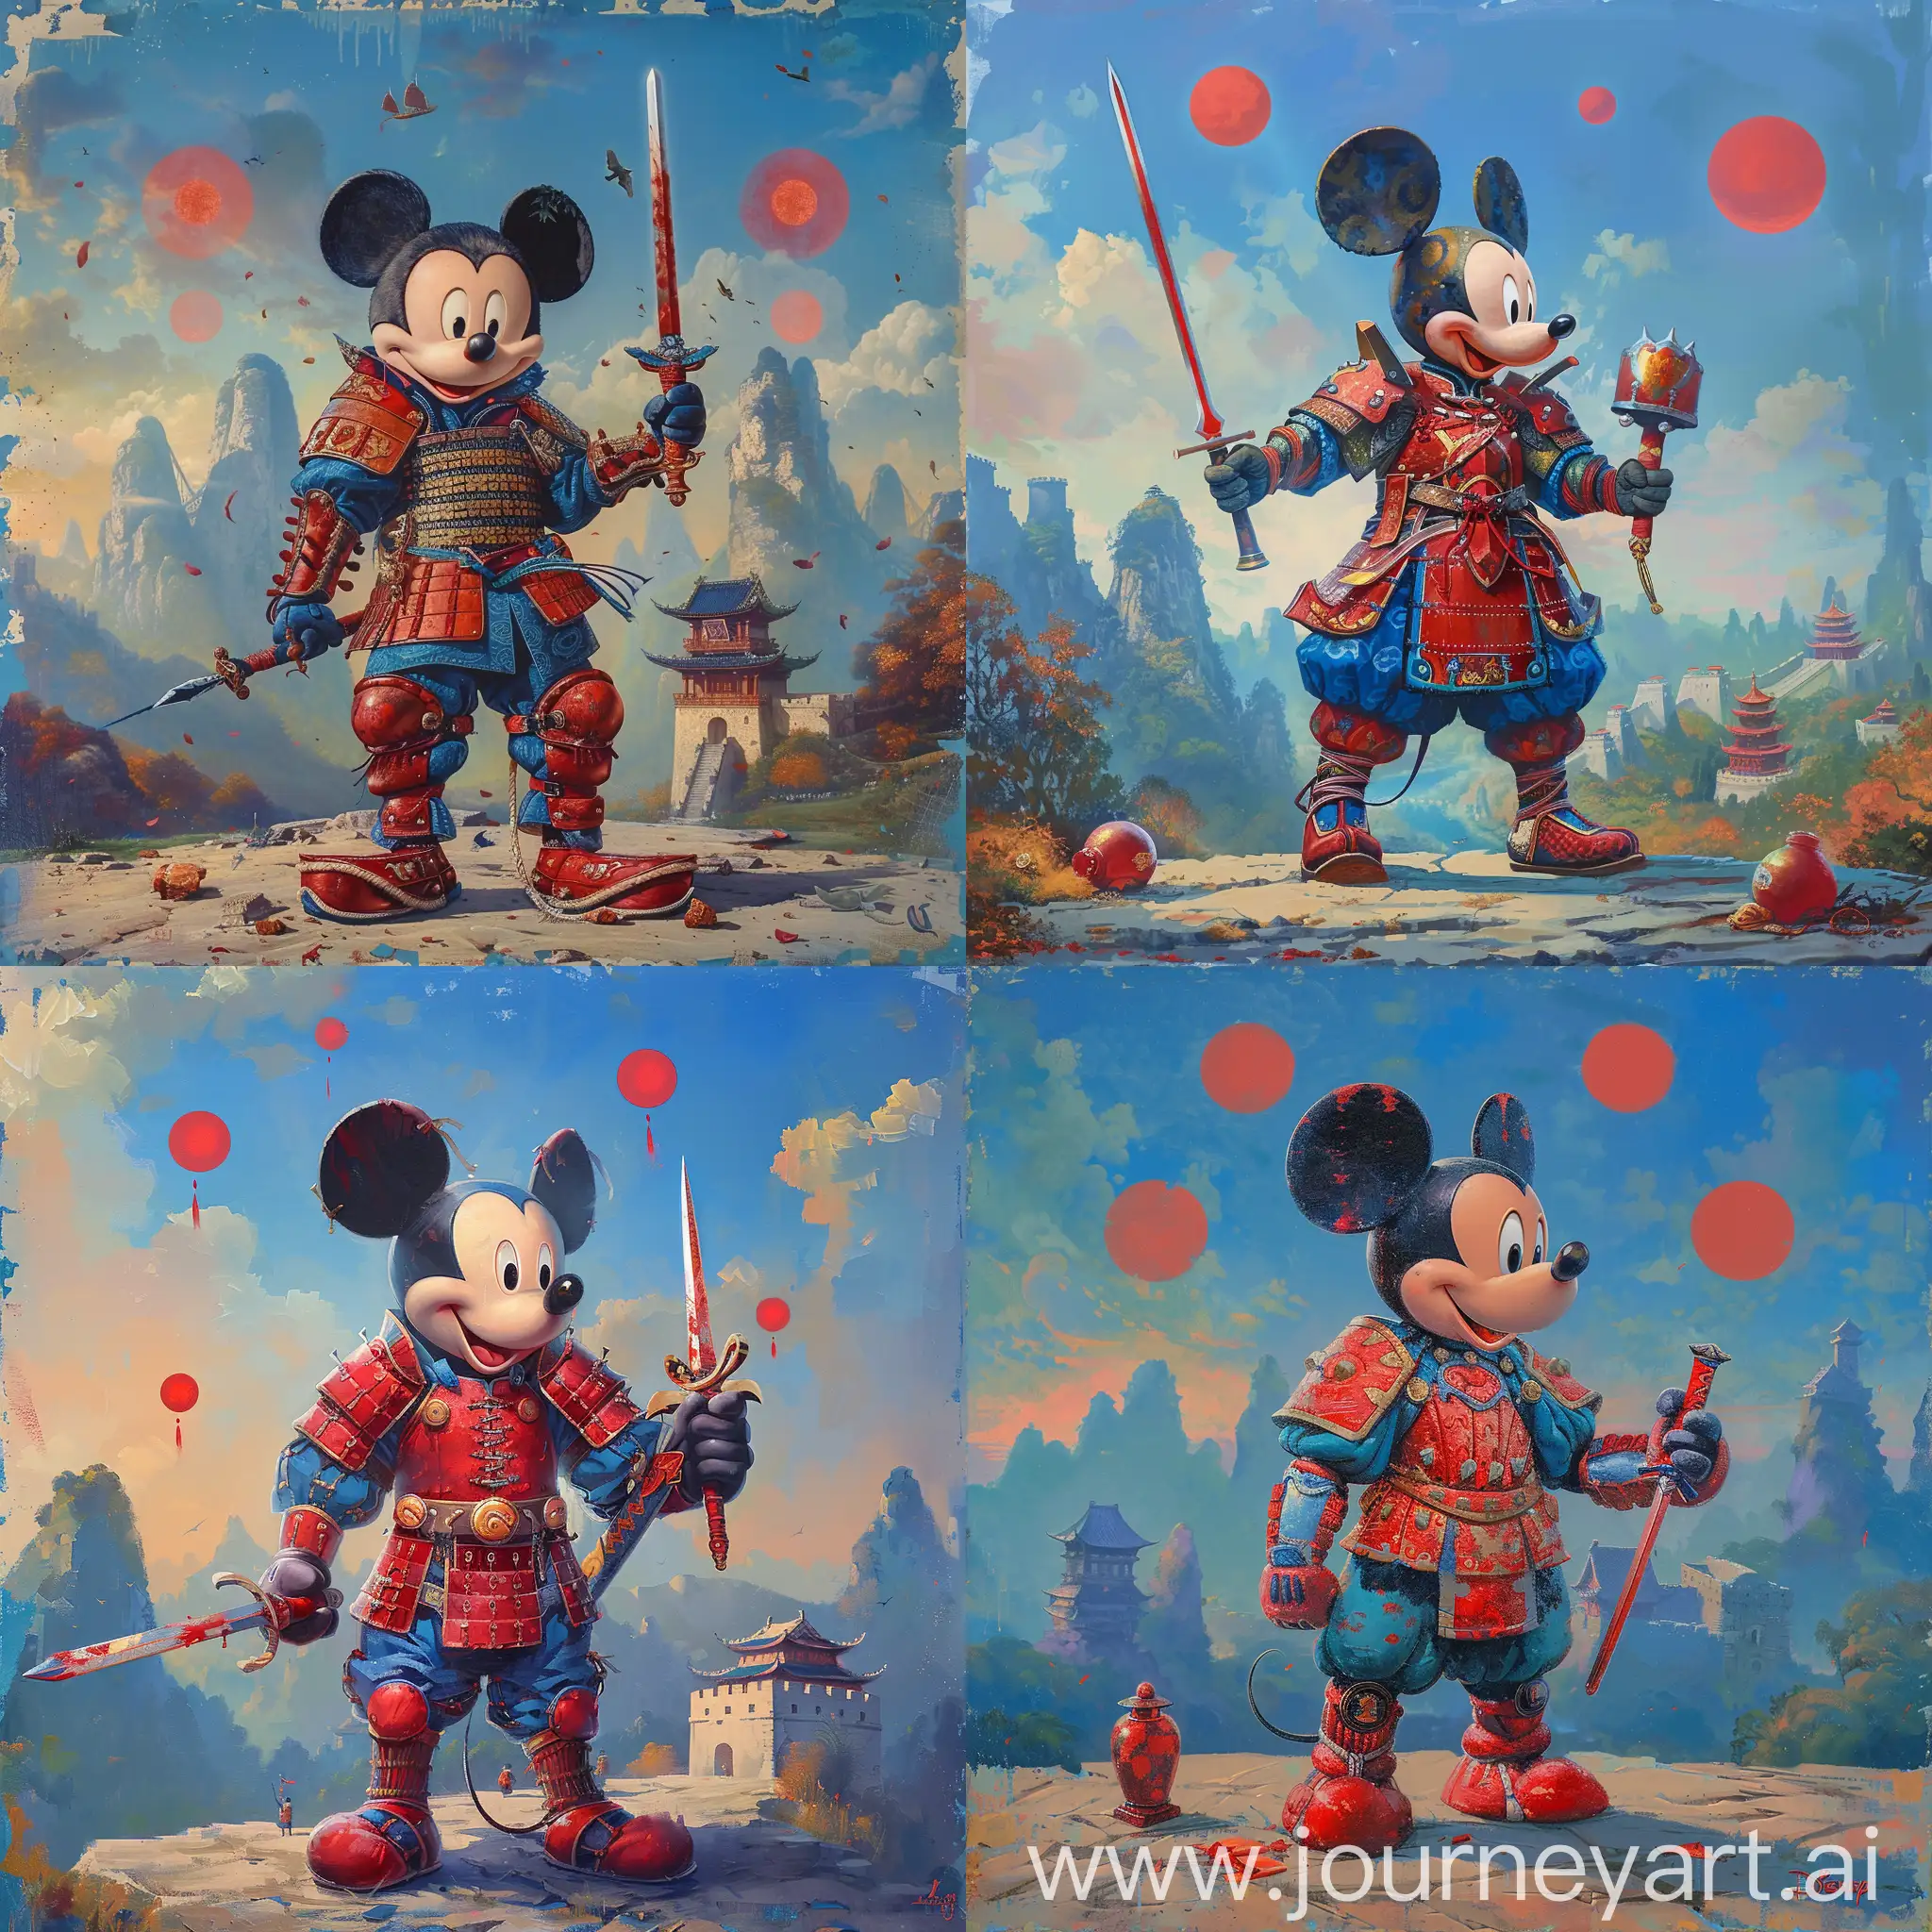 Historic painting style:

a cute Disney Mickey Mouse, it wears red and blue color Chinese style medieval armor and boots,

it holds a Chinese sword in right hand, 

Chinese Guilin mountains and castle as background, three small red suns in blue sky.